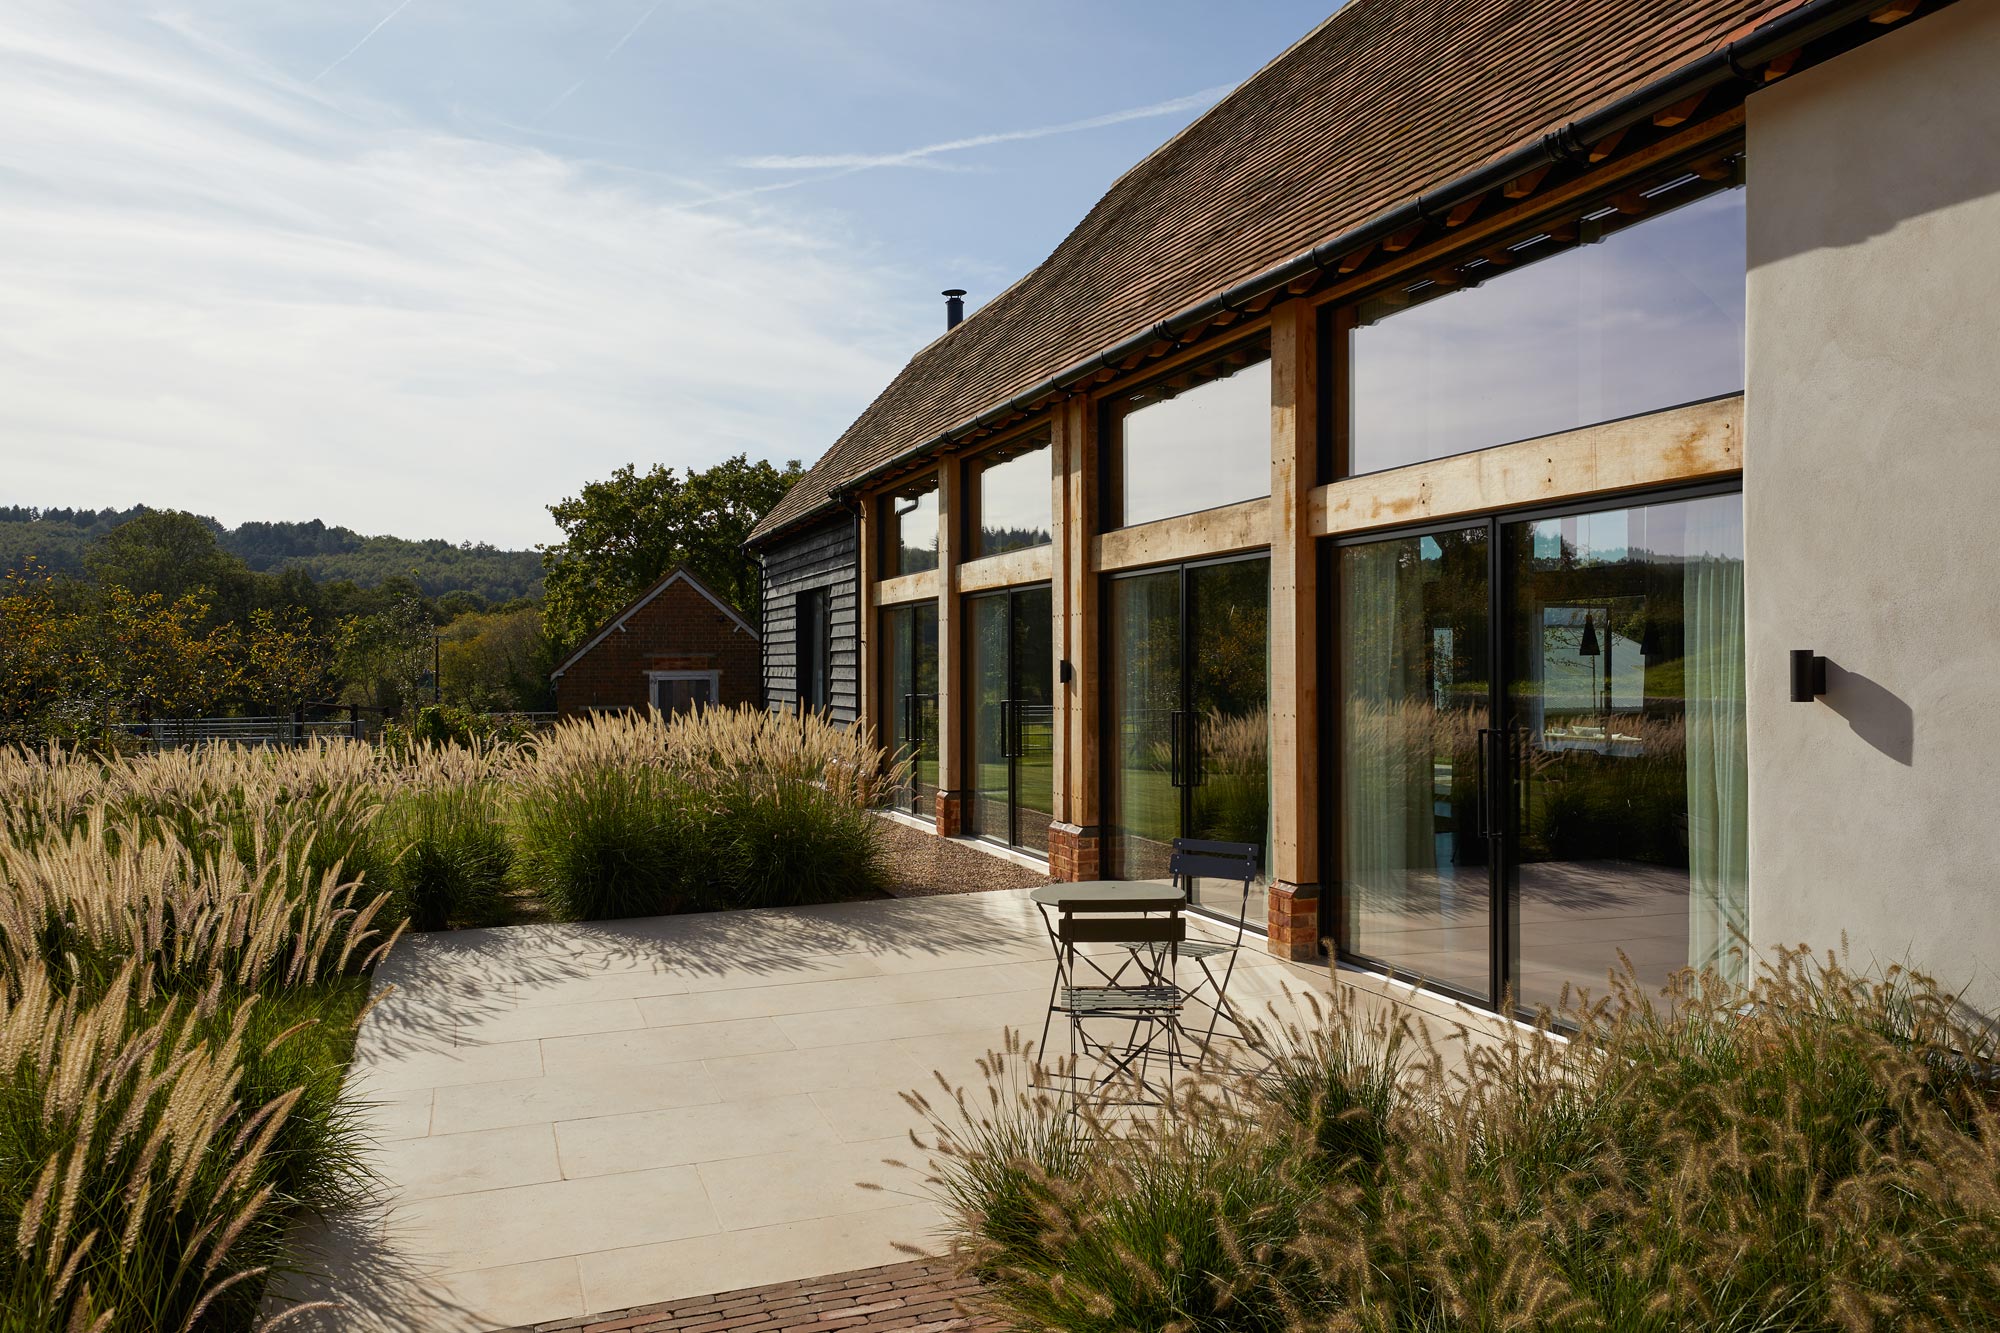 The completed Oak Barn Renovation in the Surrey Hills